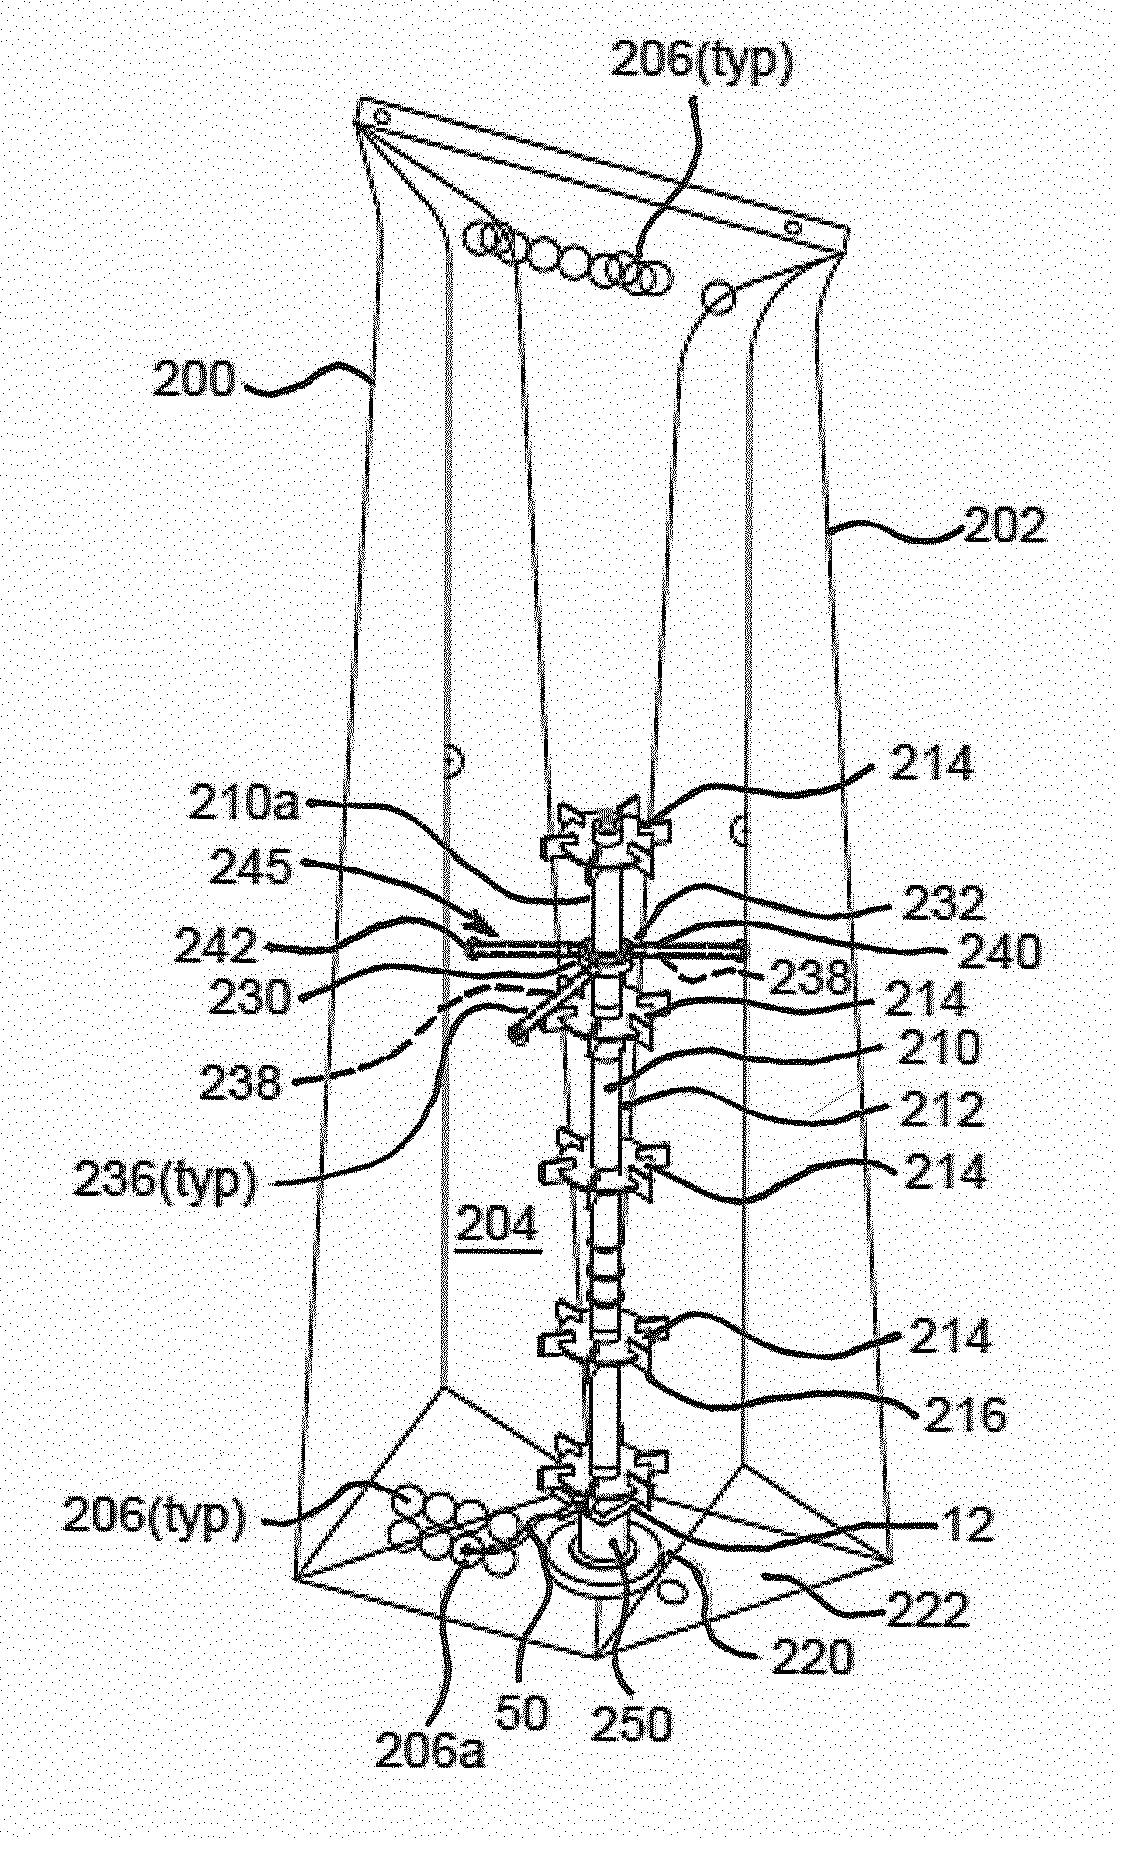 Shaft-Mounted Fluid Transfer Assembly for a Disosable Bioreactor